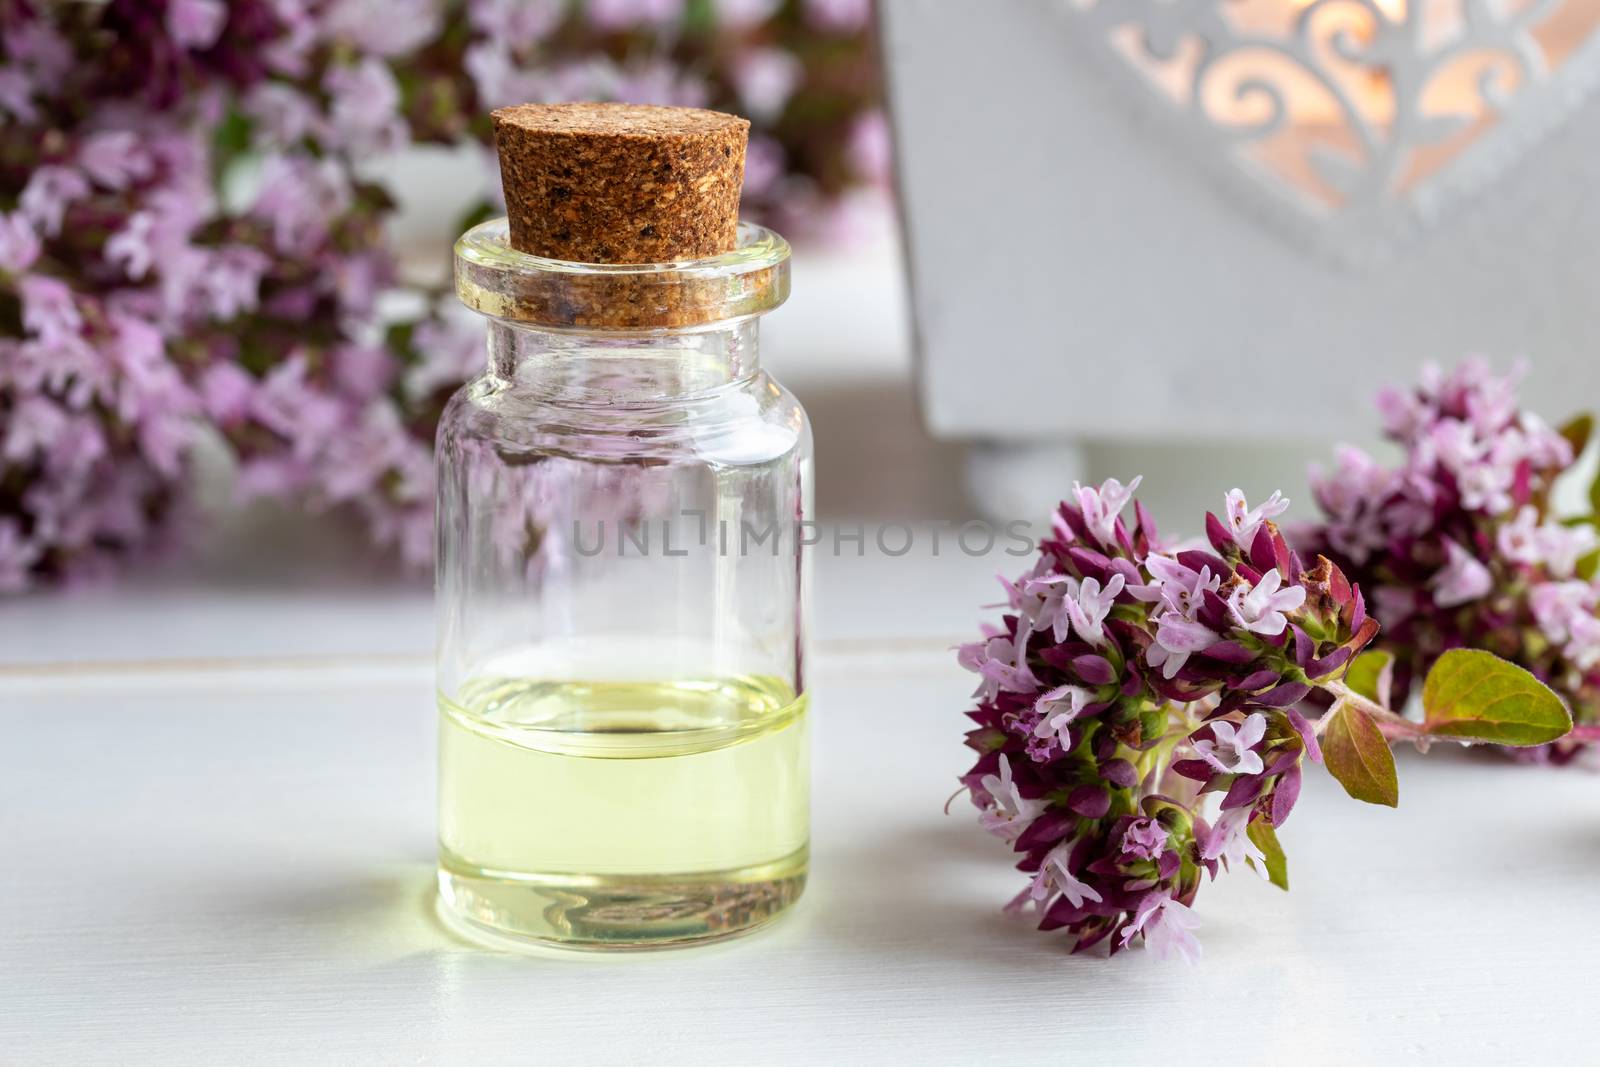 A bottle of essential oil with fresh blooming oregano